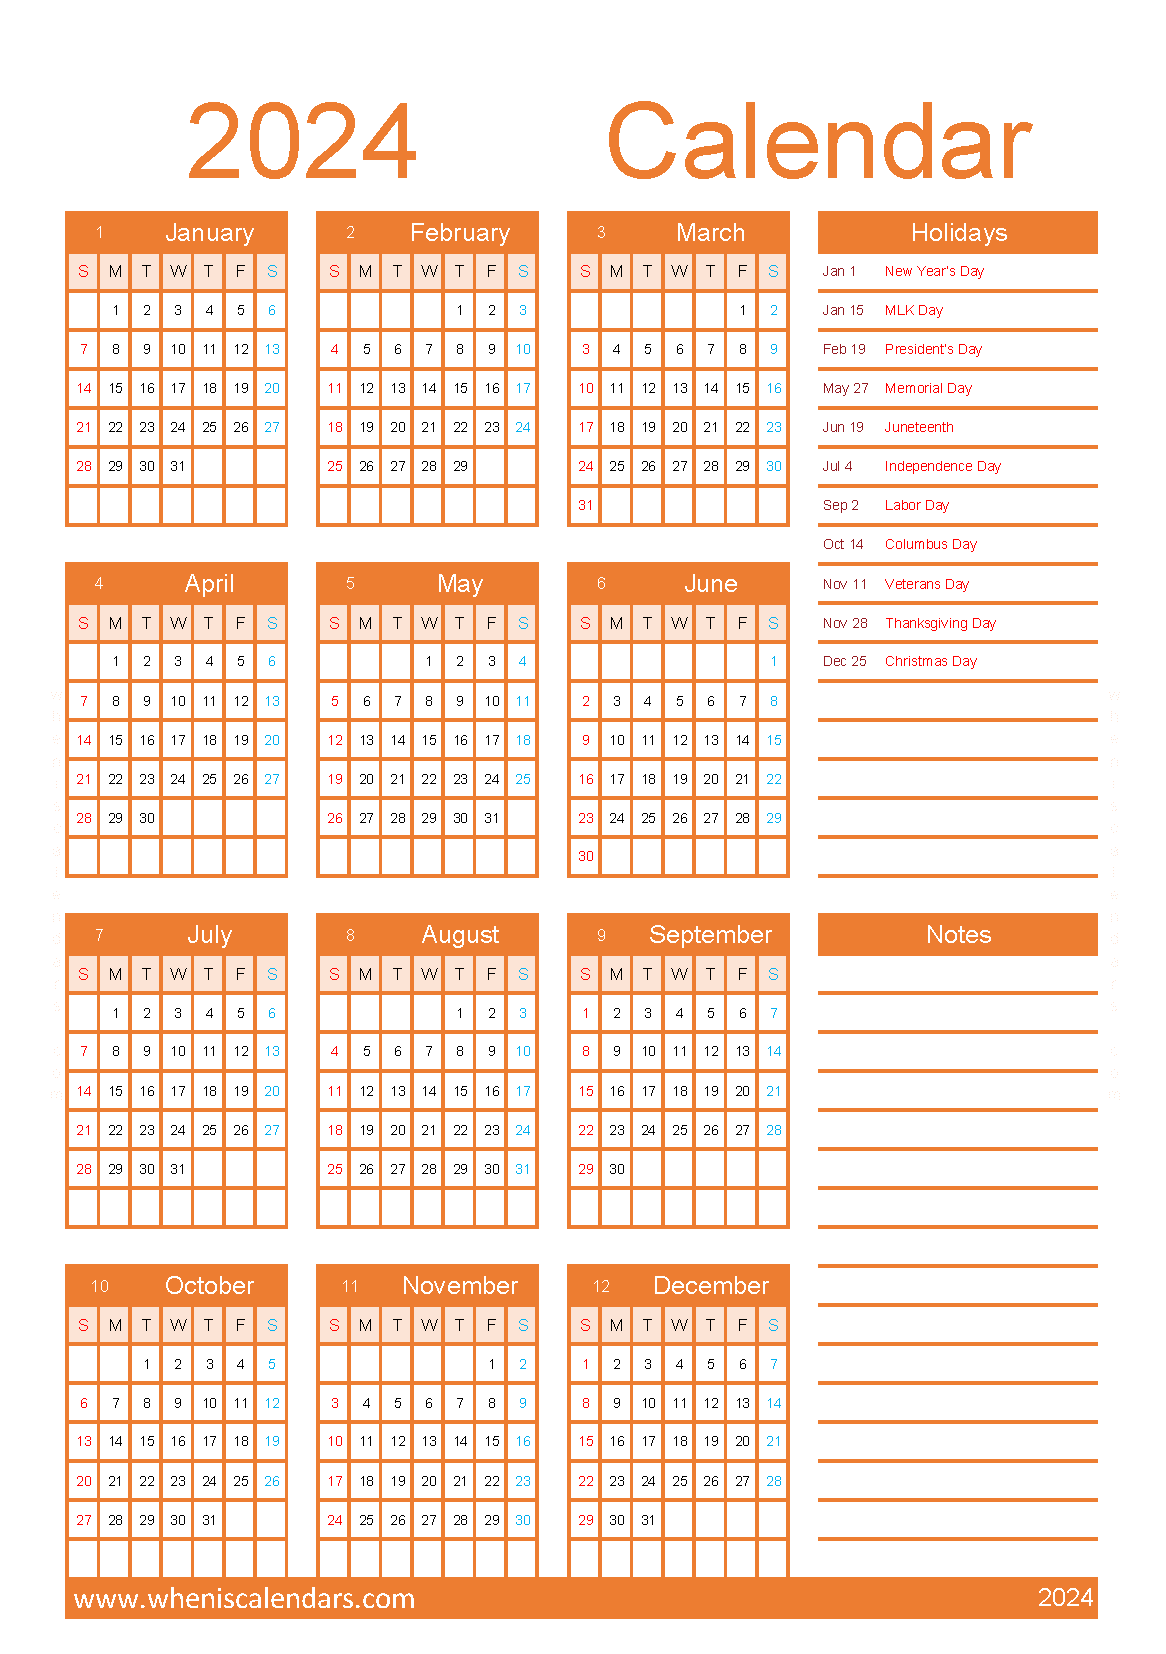 Free printable Calendar 2024 with Holidays A5 in vertical portrait